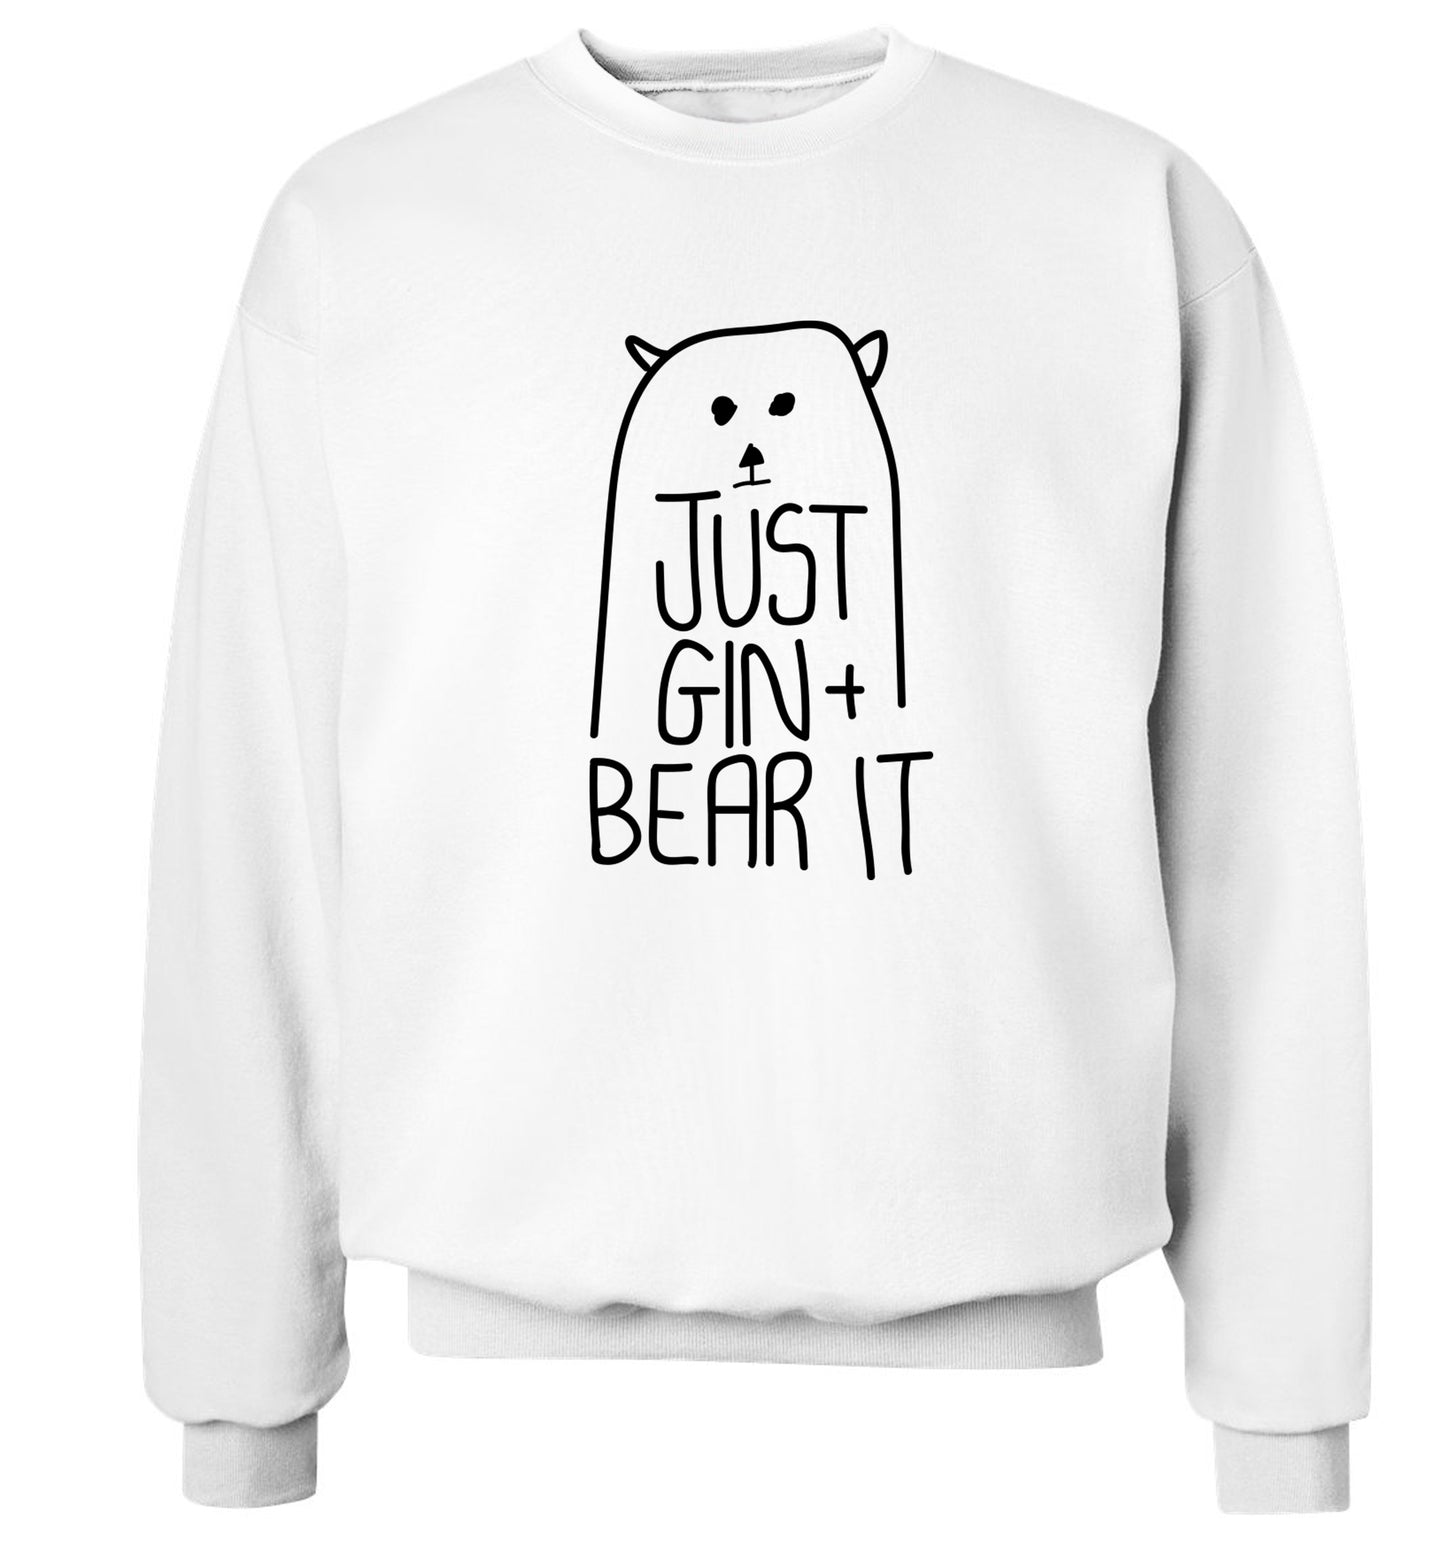 Just gin and bear it Adult's unisex white Sweater 2XL